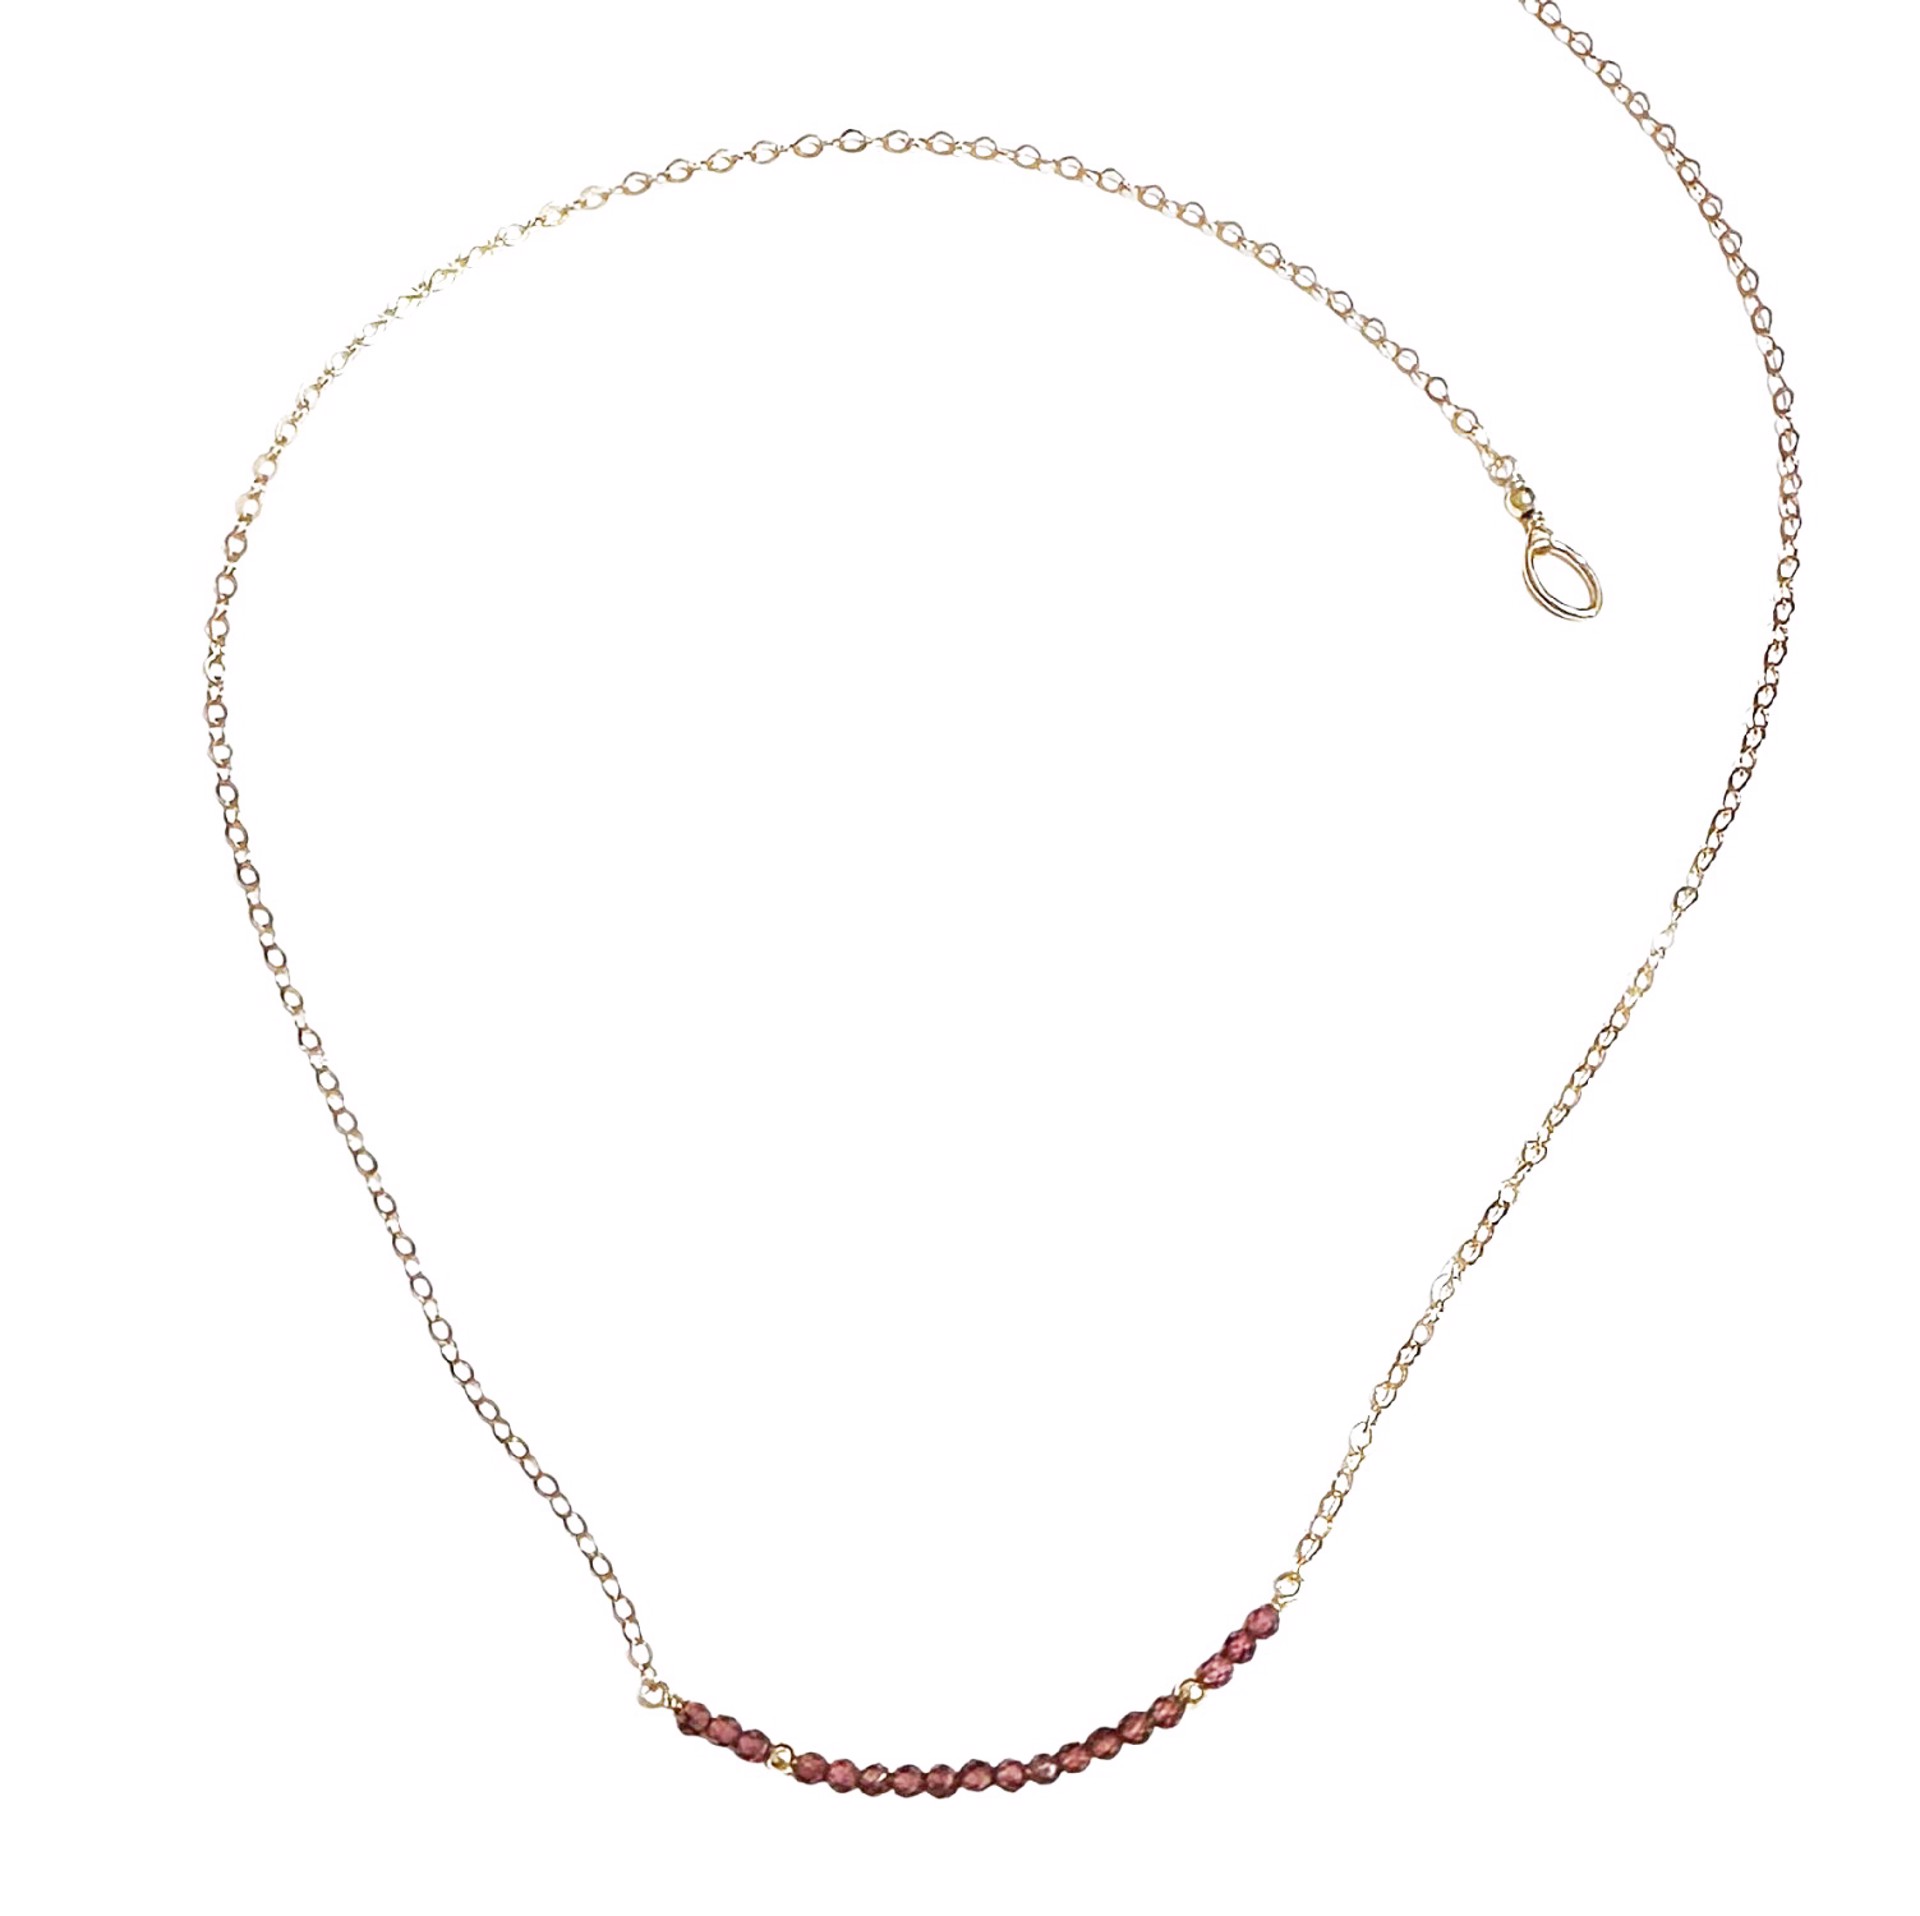 Necklace - Garnet with 14K Gold by Julia Balestracci